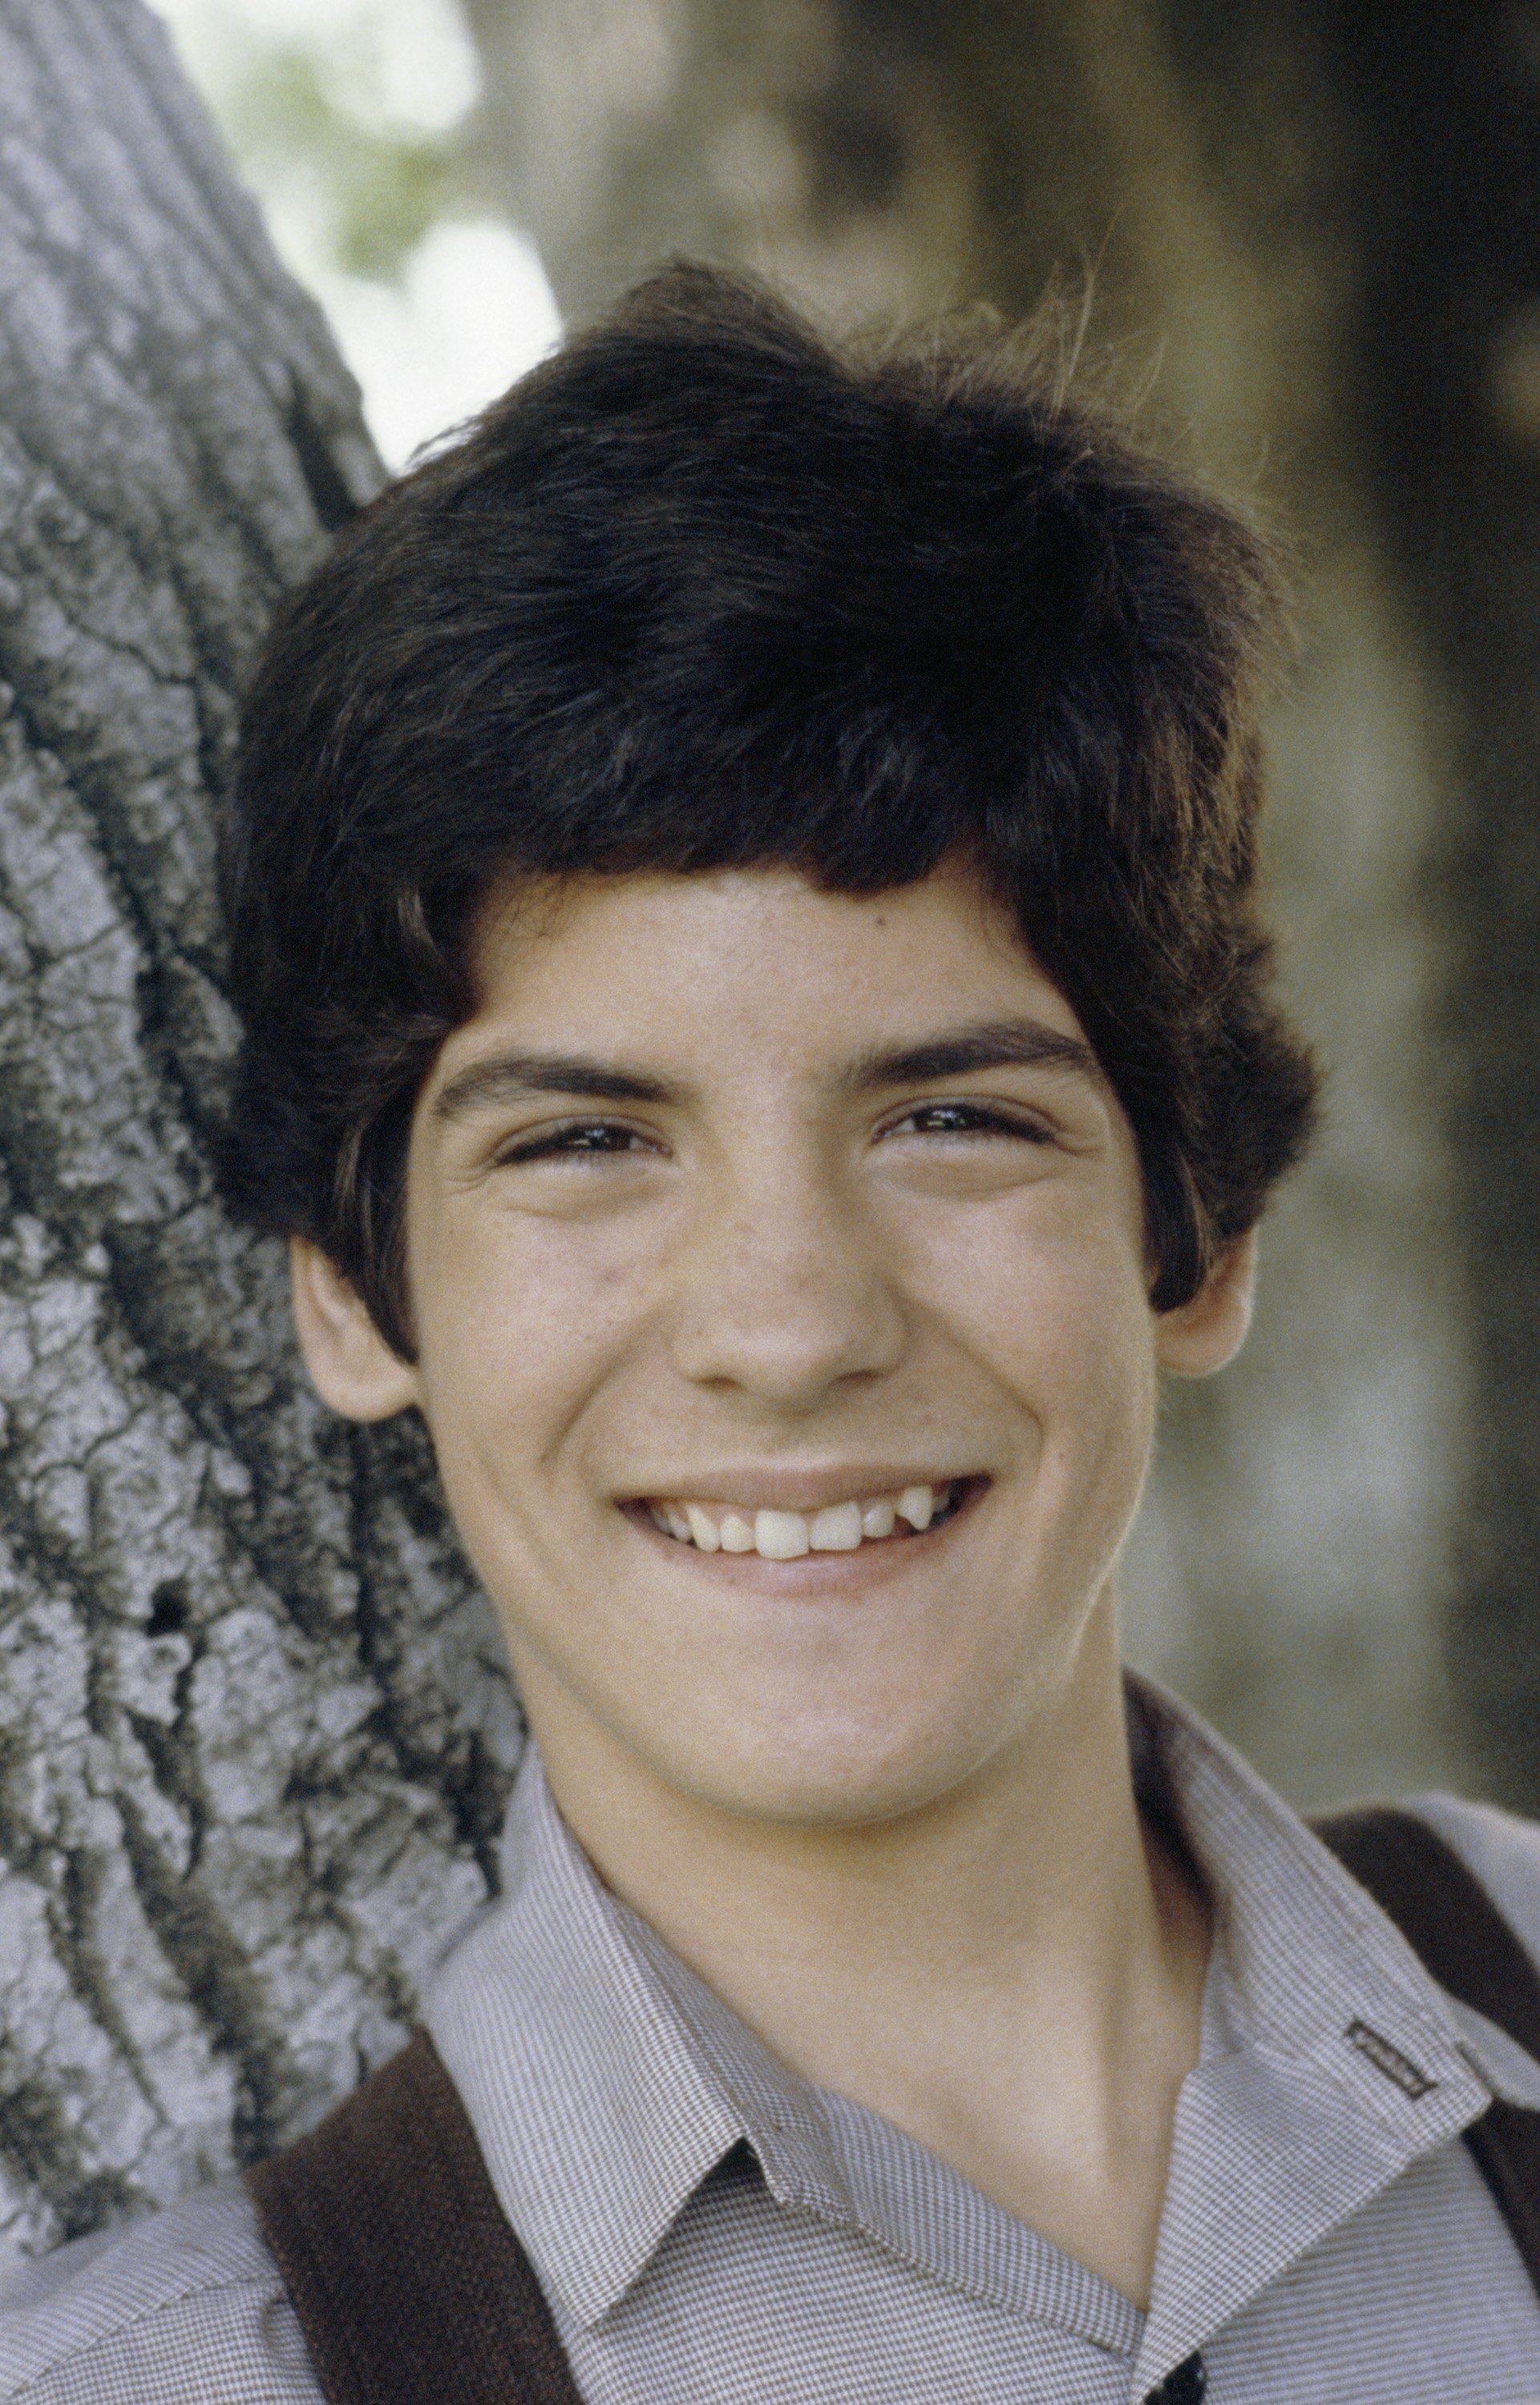 Matthew Labyorteaux as Albert Quinn Ingalls on "Little House on the Prairie" in an undated photo | Source: Getty Images 